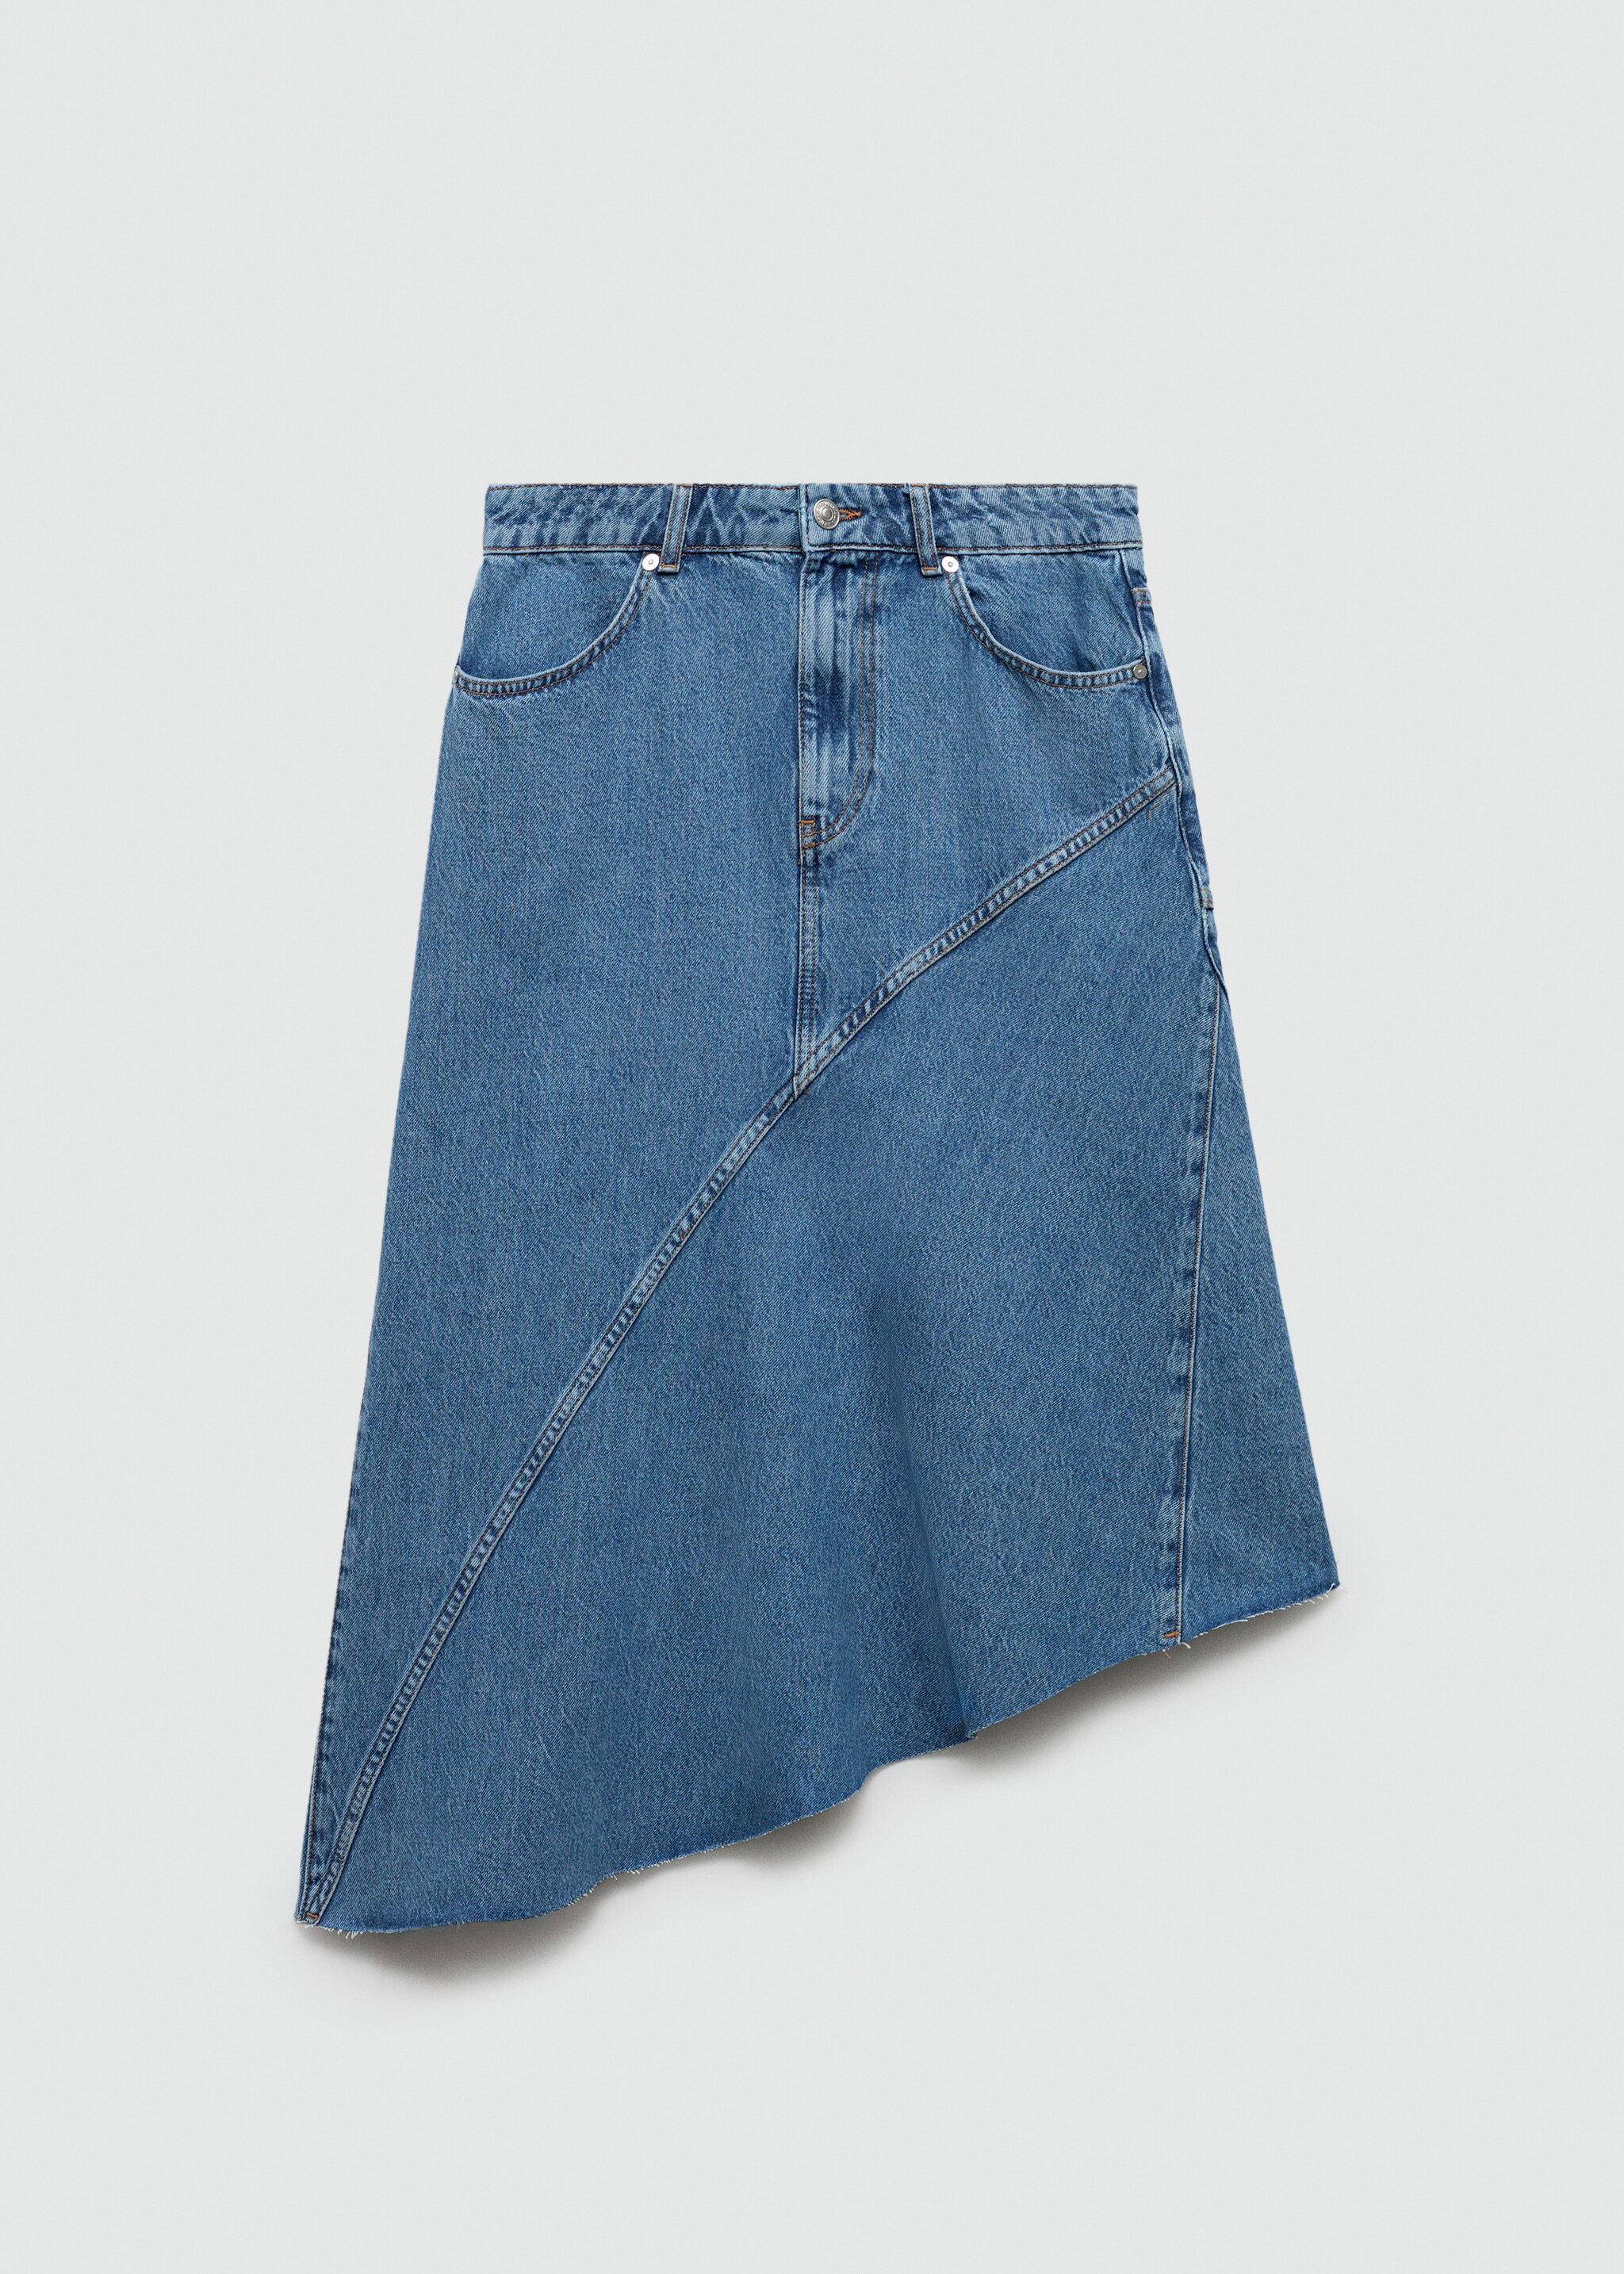 Asymmetrical denim skirt - Article without model